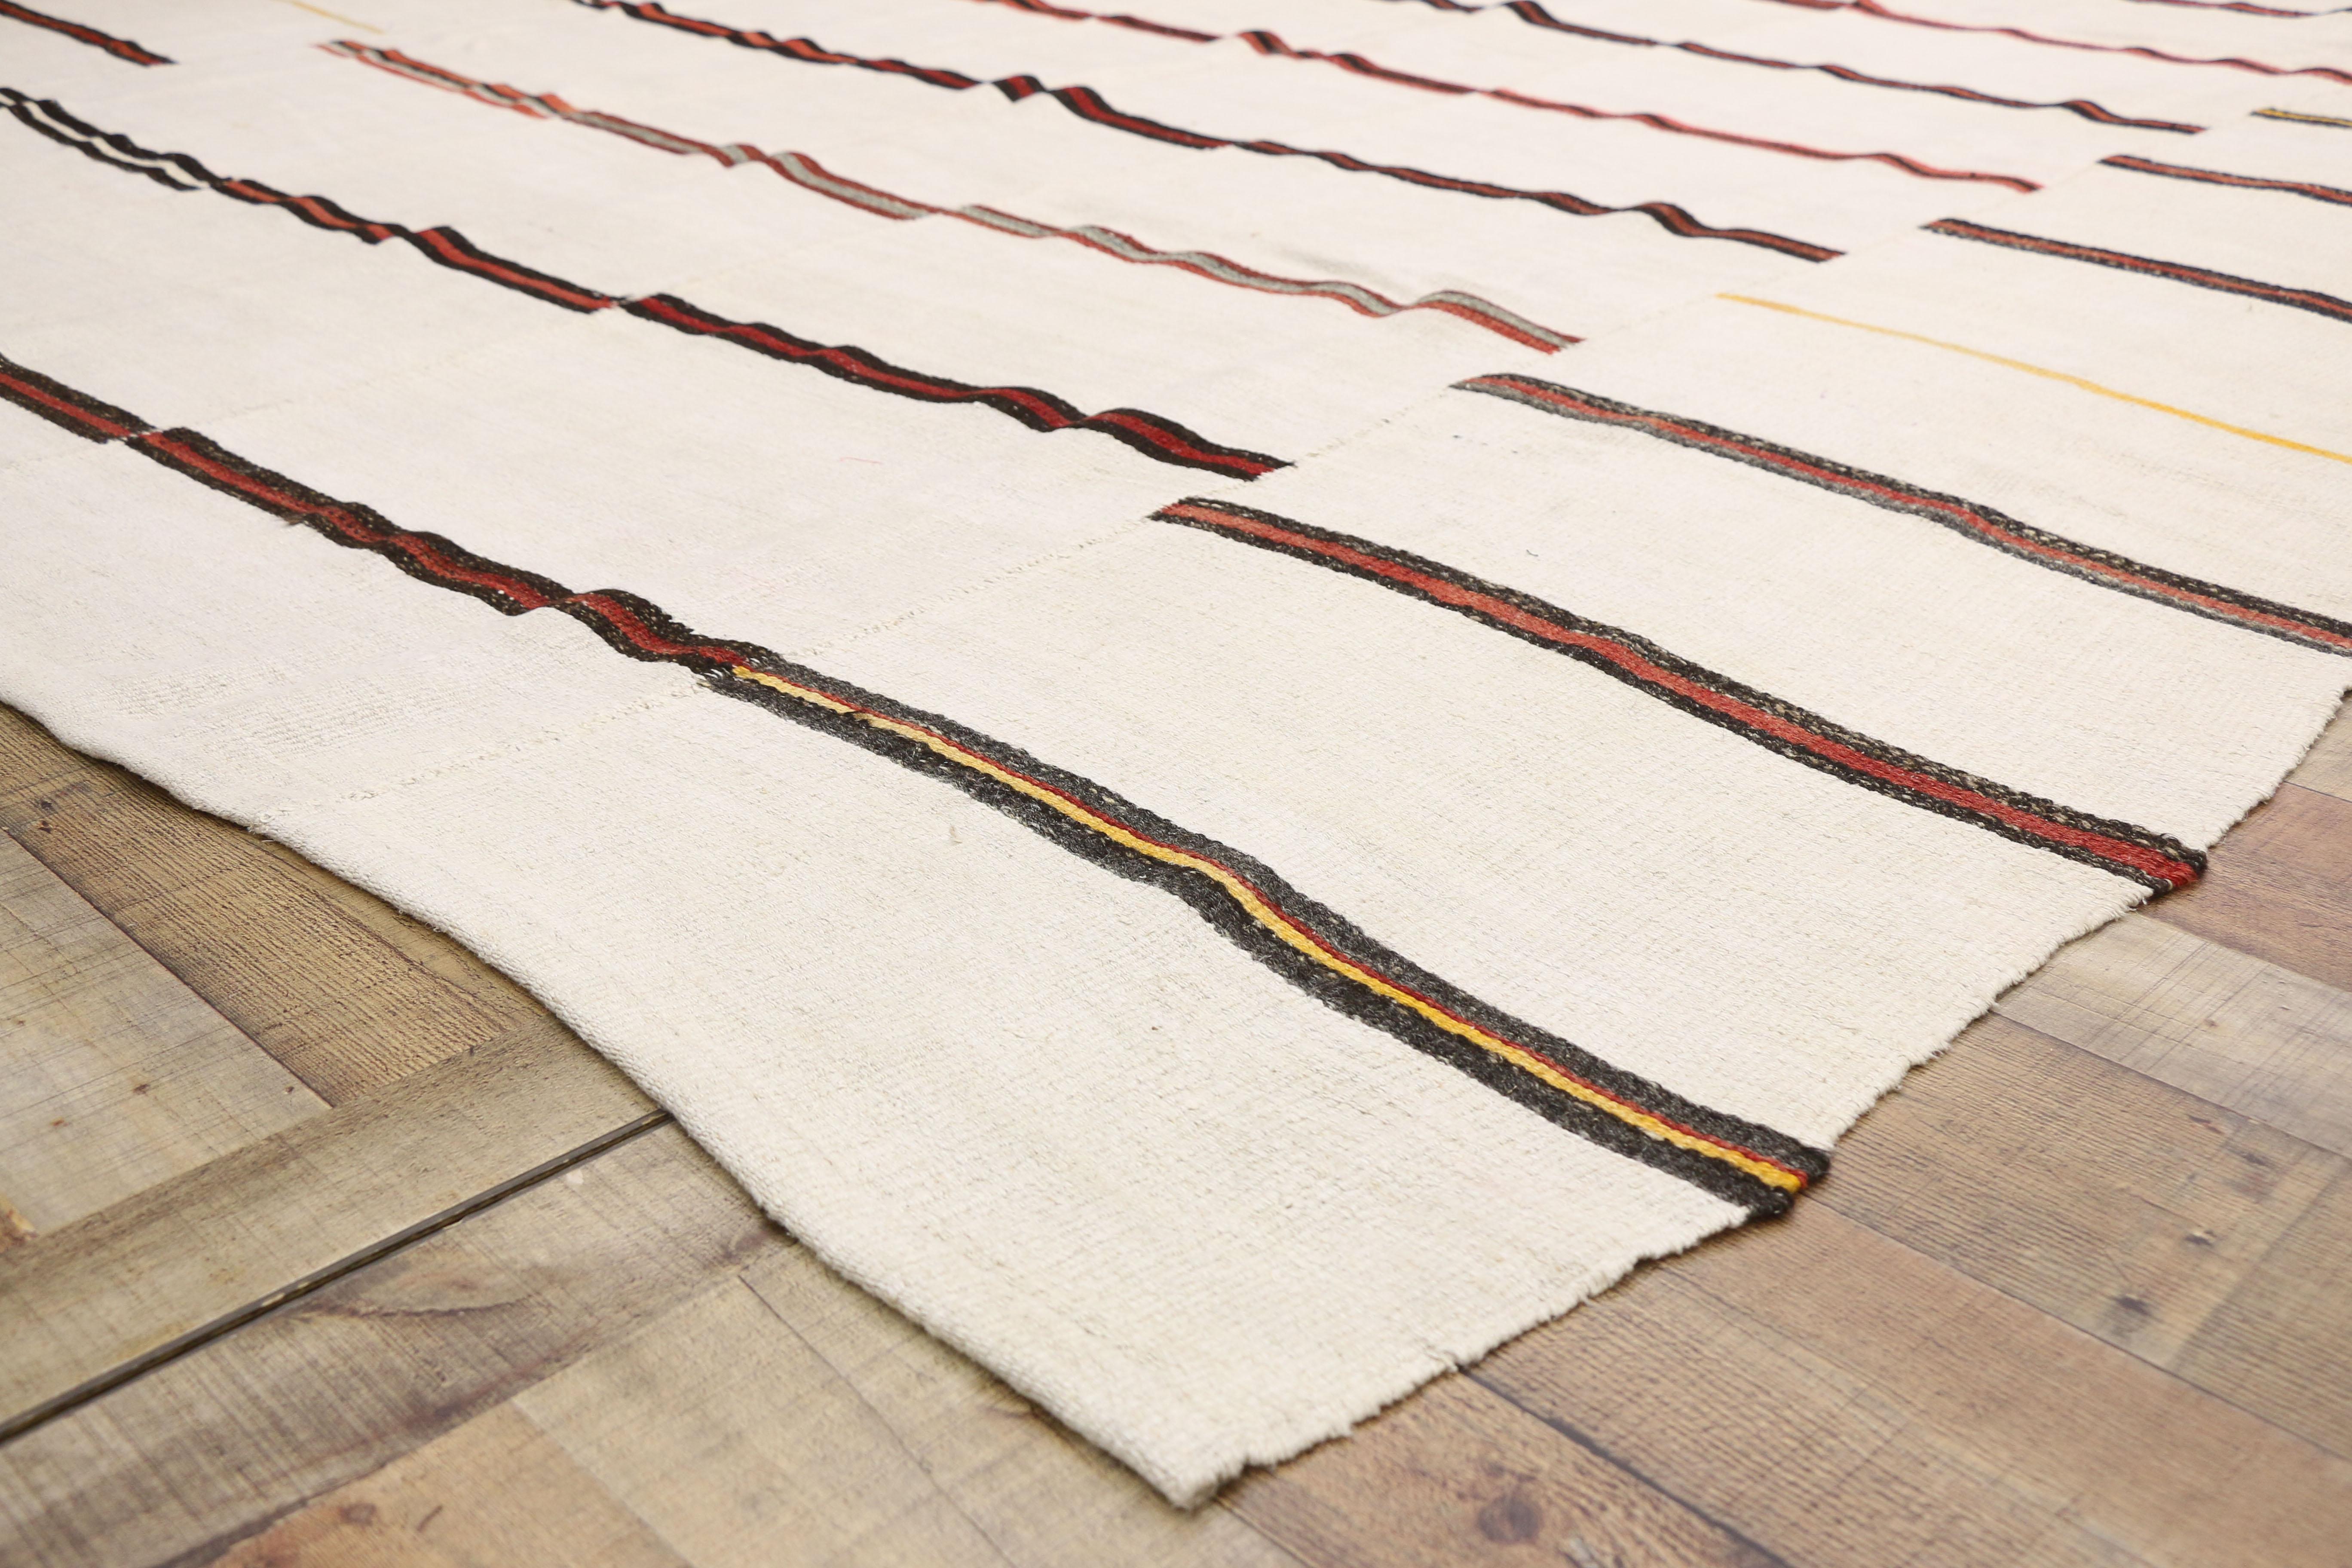 20th Century Vintage Striped Kilim Rug with Modernist Style, Large Flat-Weave Area Rug